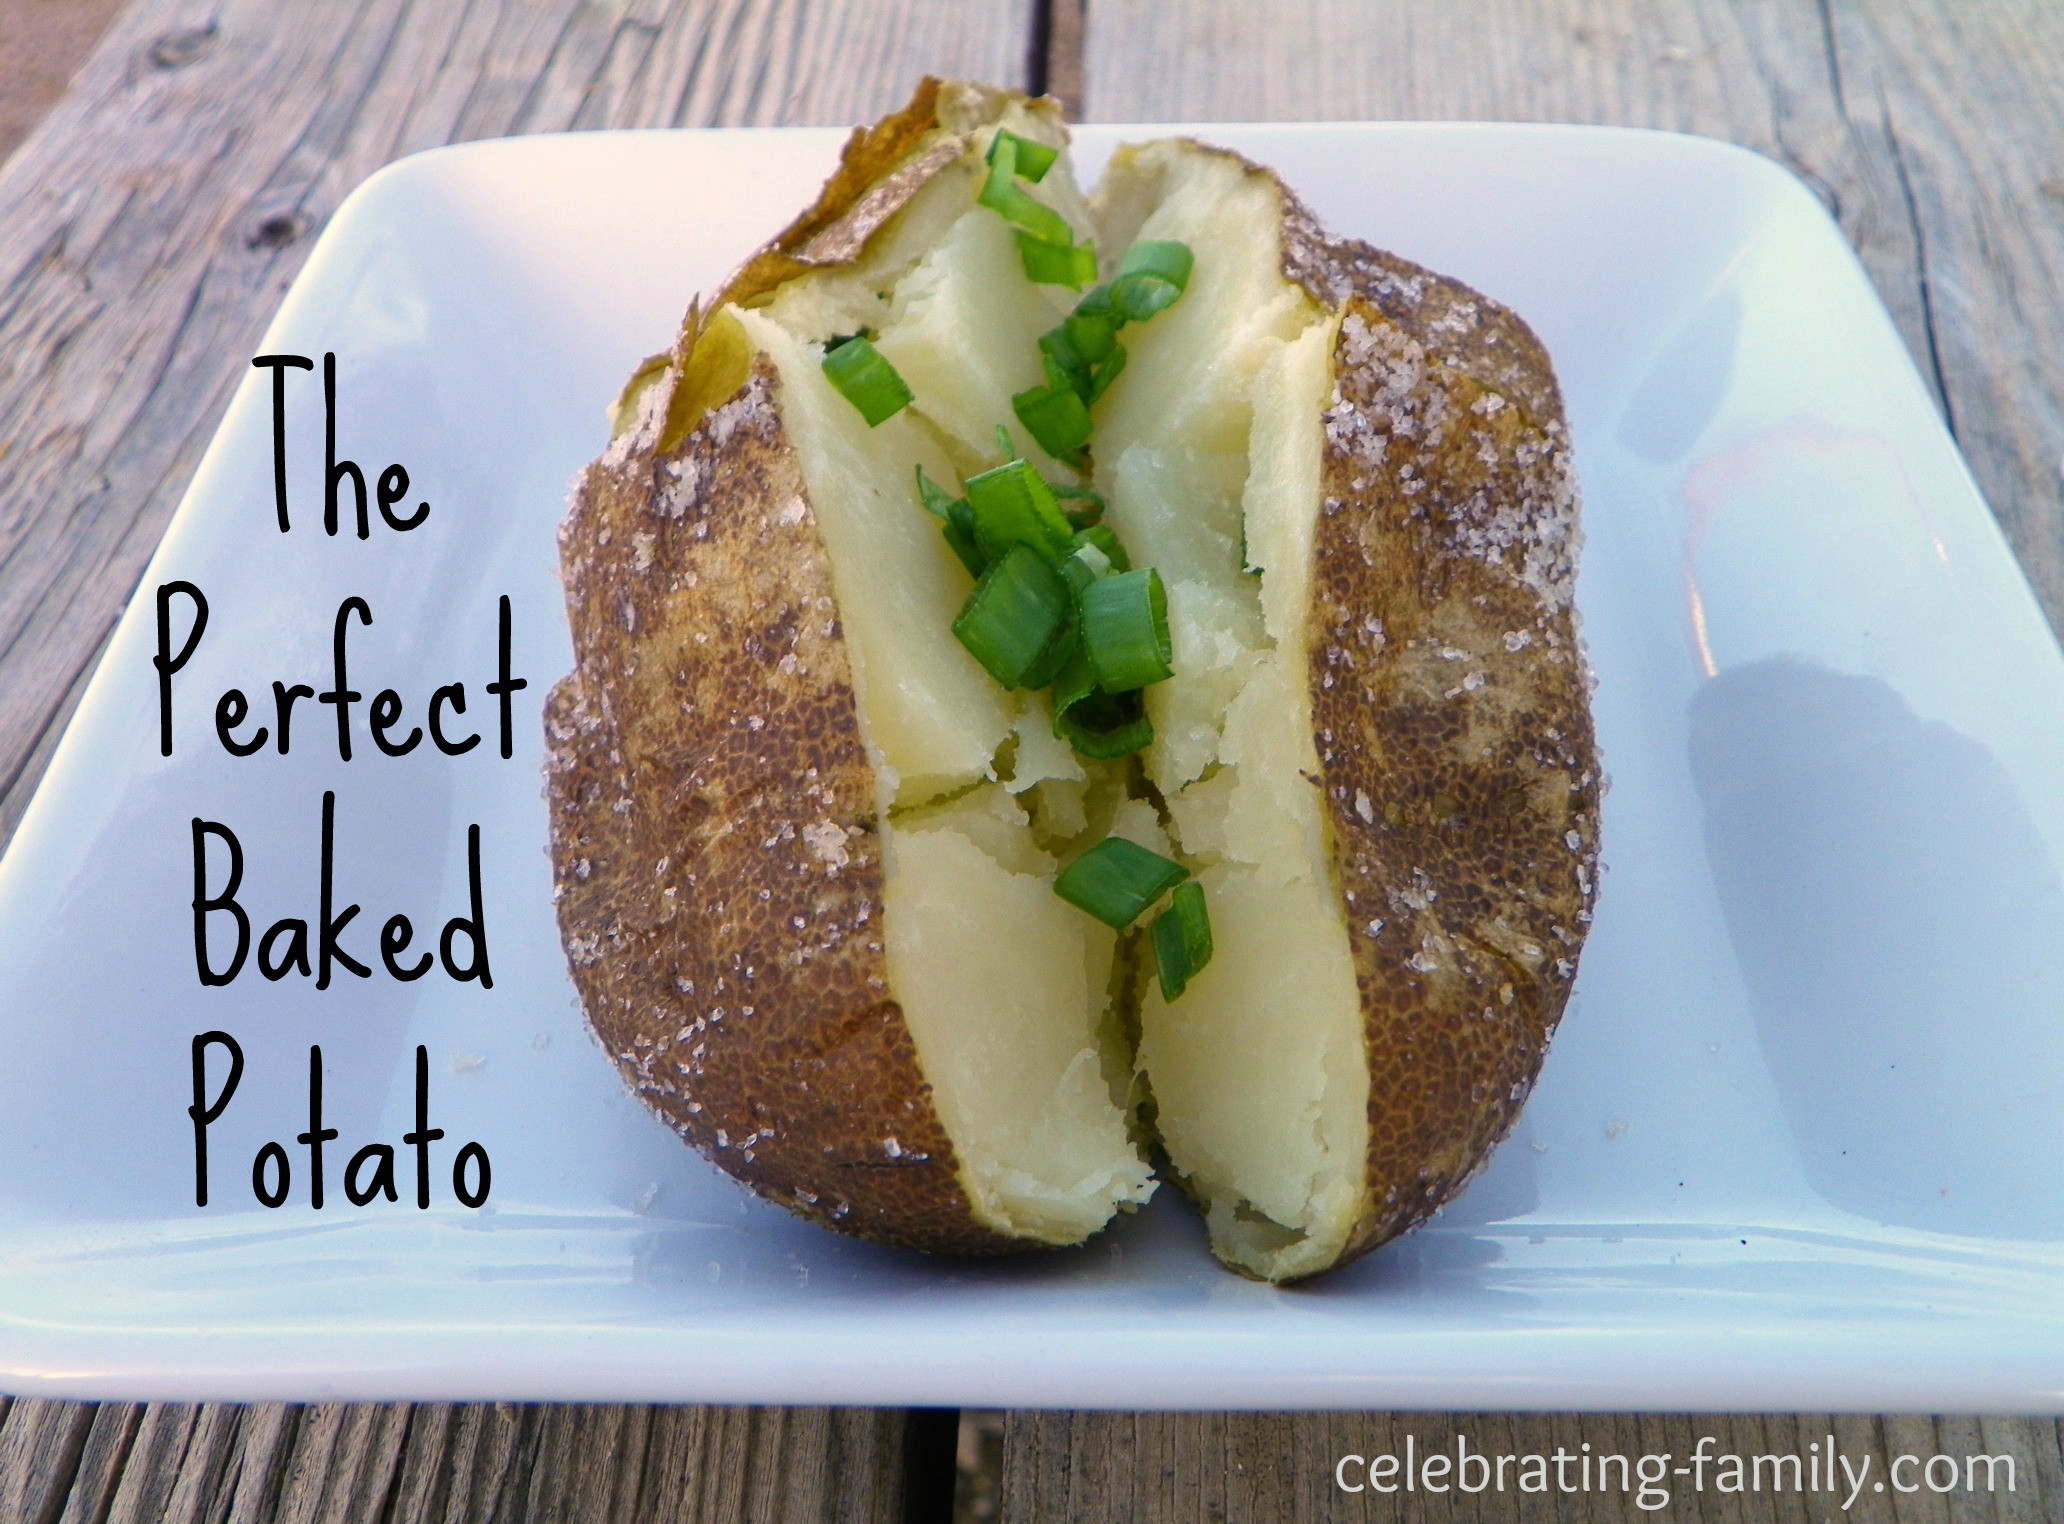 How To Make The Perfect Baked Potato
 How to Make the Perfect Baked Potato